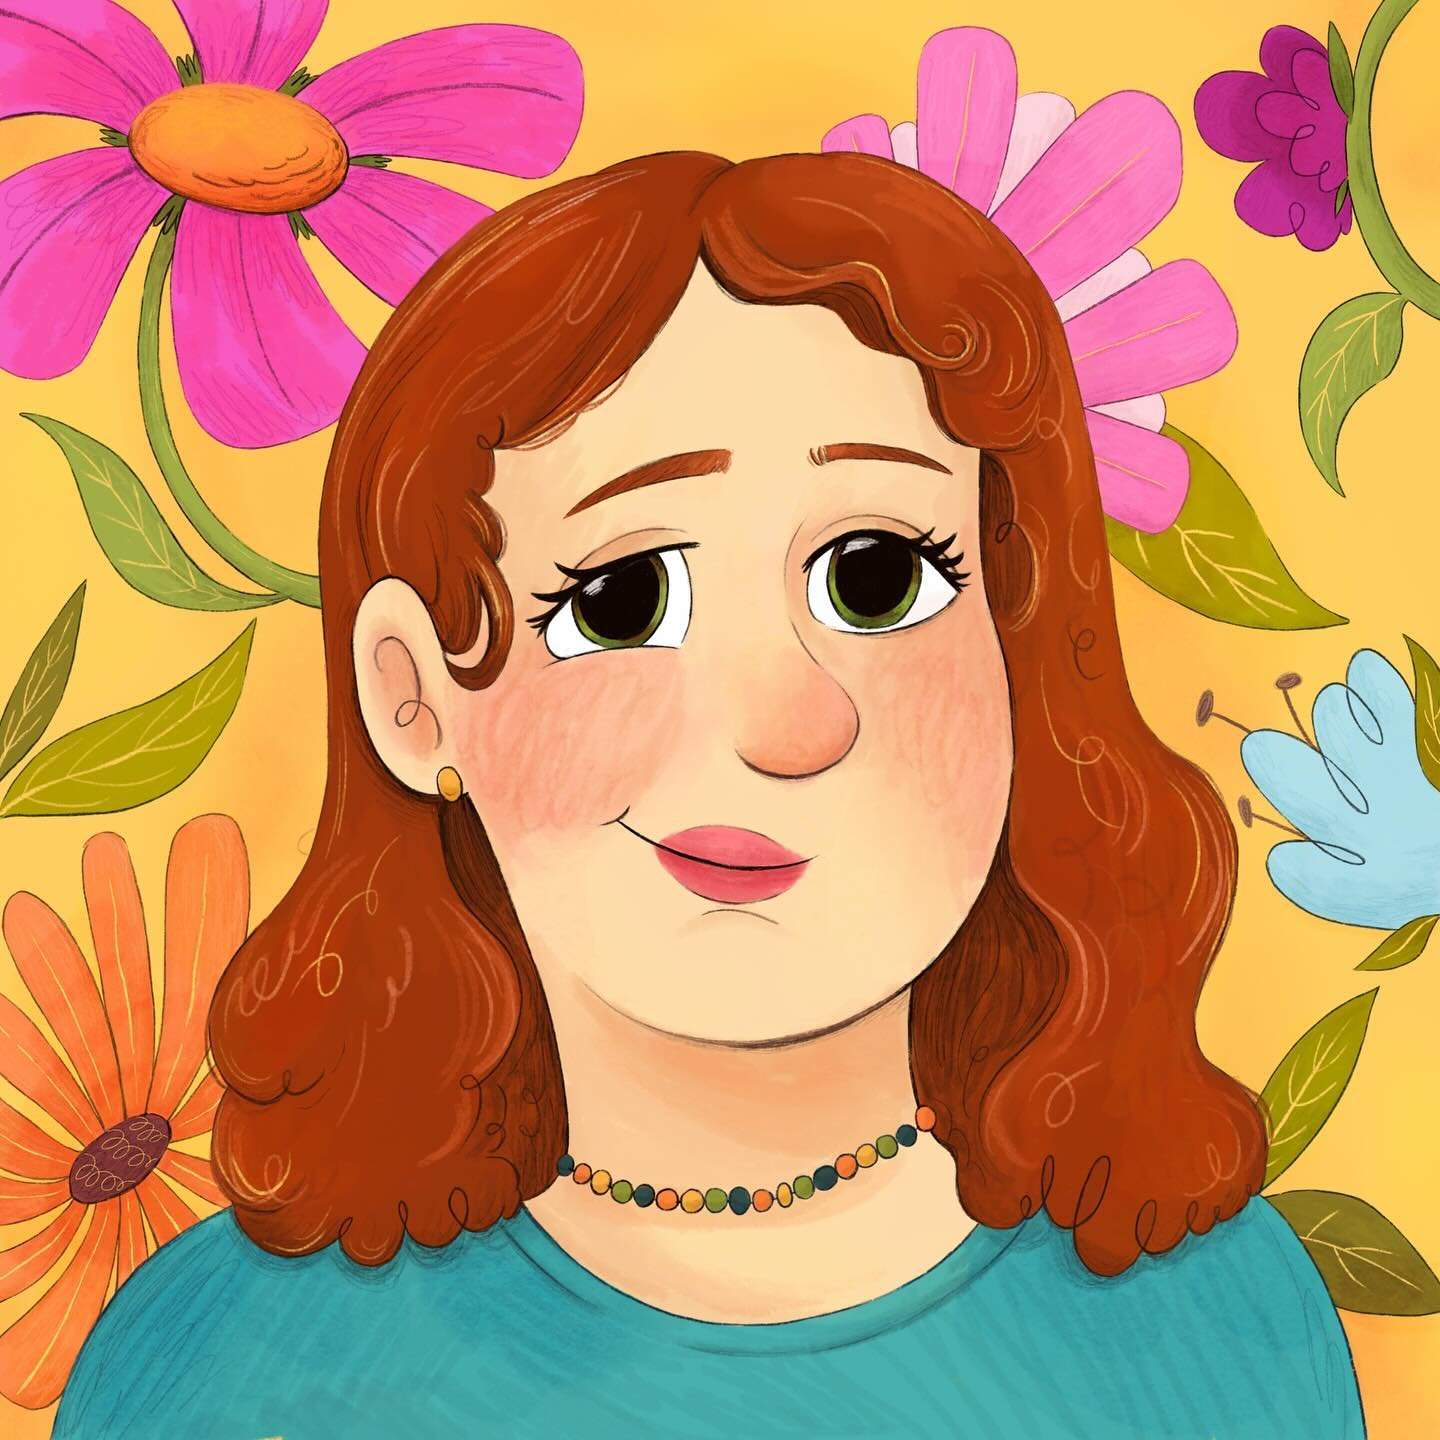 2024 Updated self portrait ✨ swipe to see last year's version! I have been going through some stylistic changes and my art seems to come much more naturally to me this way! I hope you like it! 🥰
.
.
.
.
.
#selfportrait #artprogress #artstyle #kidlit